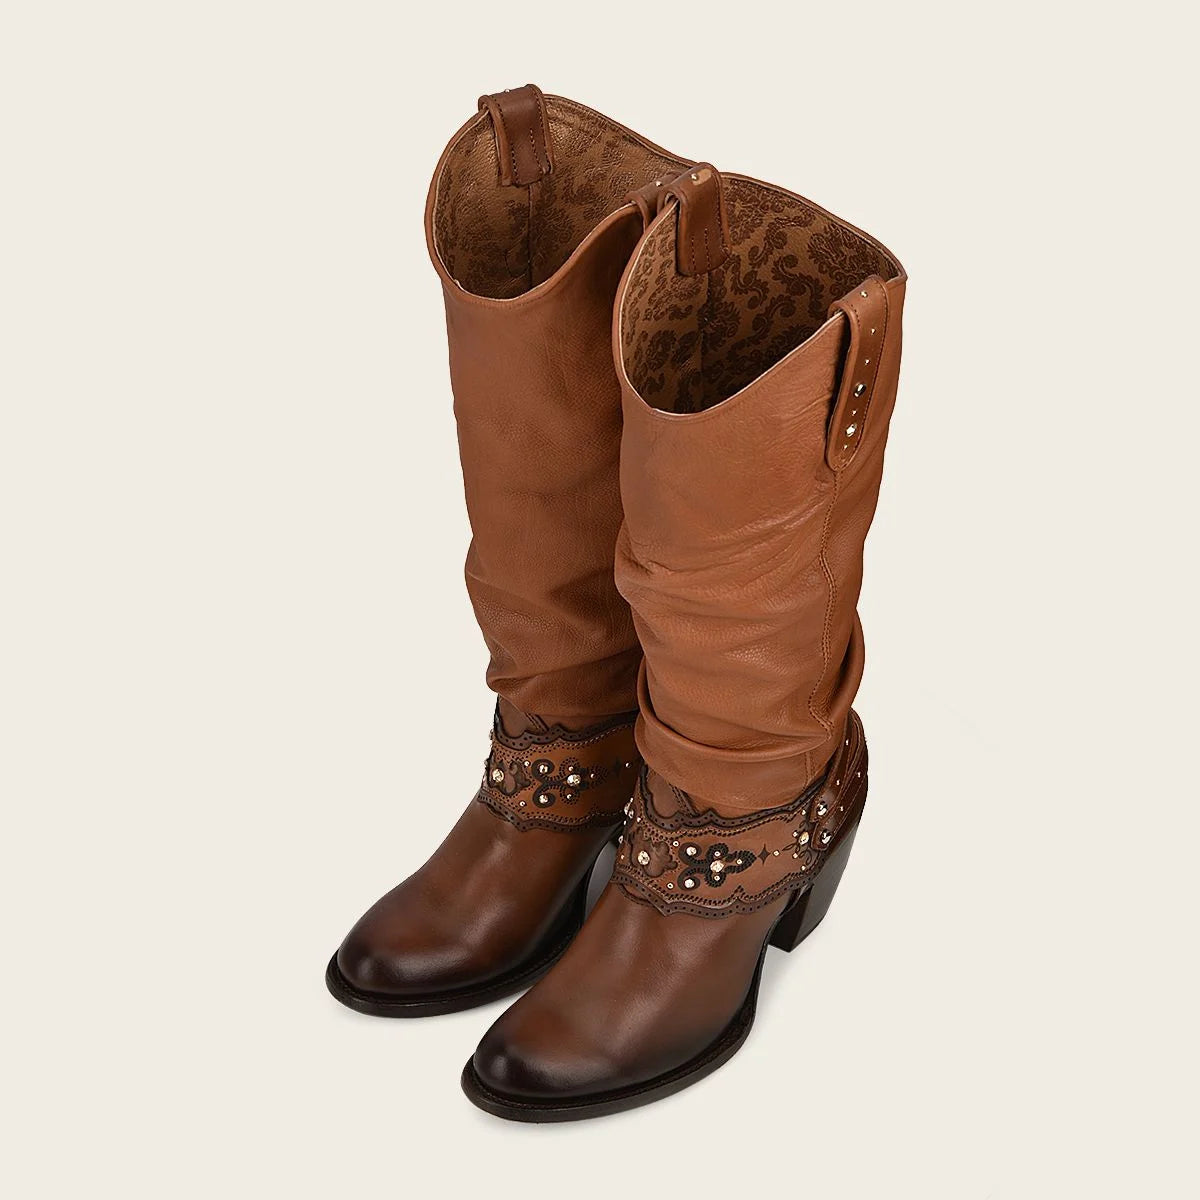 Hand painted honey leather boots, with loose tube for comfort and ease of wea